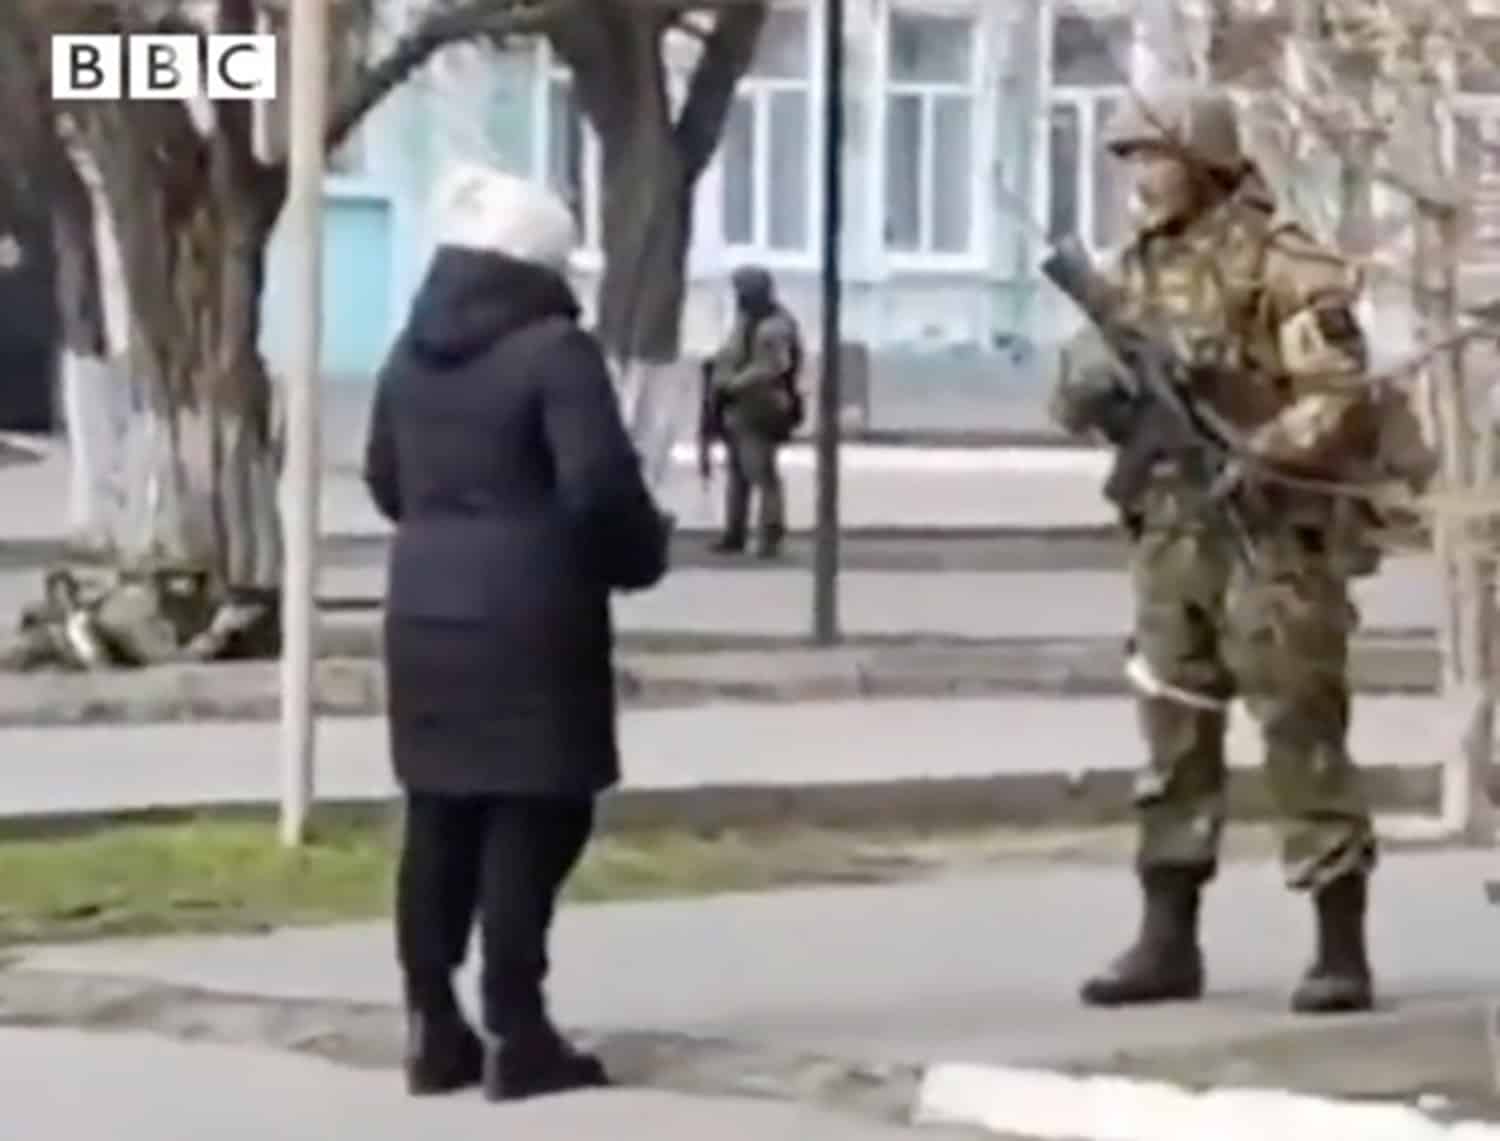 Full transcript of Ukrainian woman’s stand-off with Russian soldier